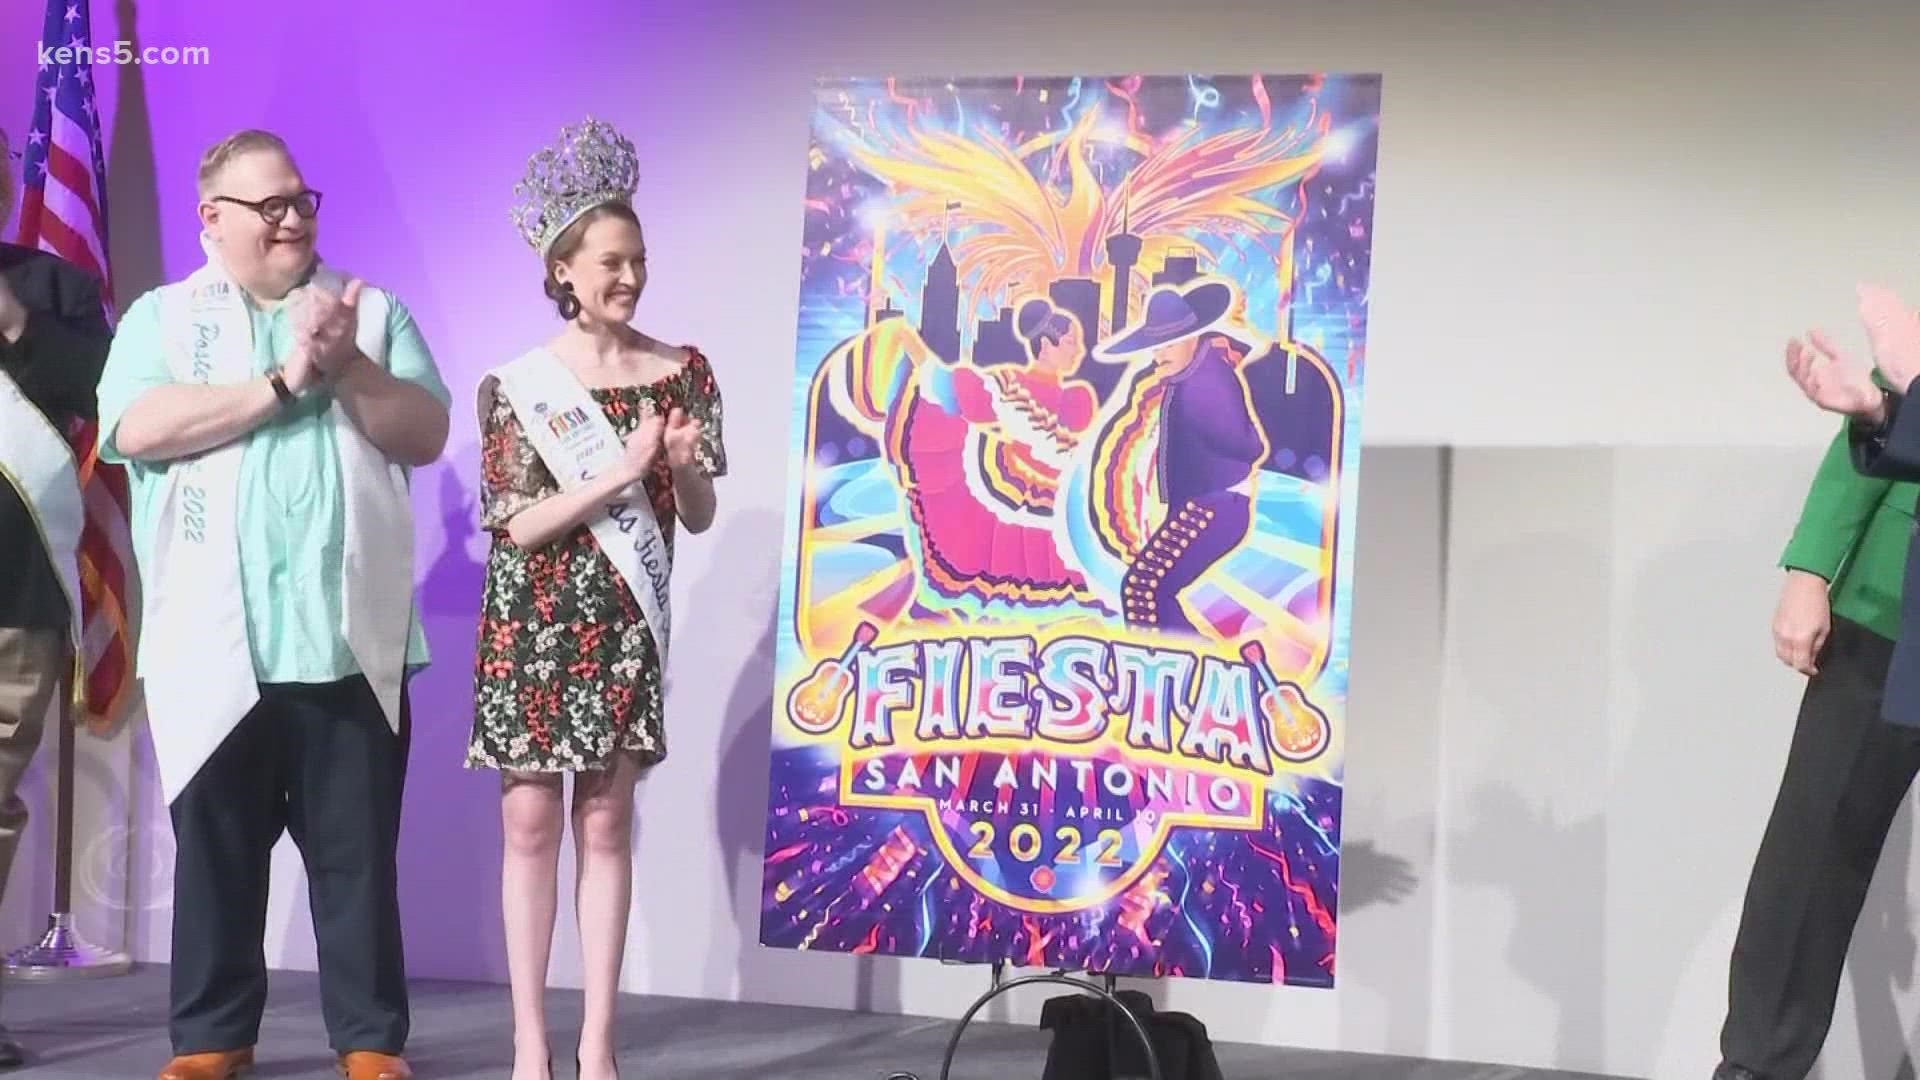 The unveiling of the Official Fiesta 2022 poster was revealed Wednesday evening.